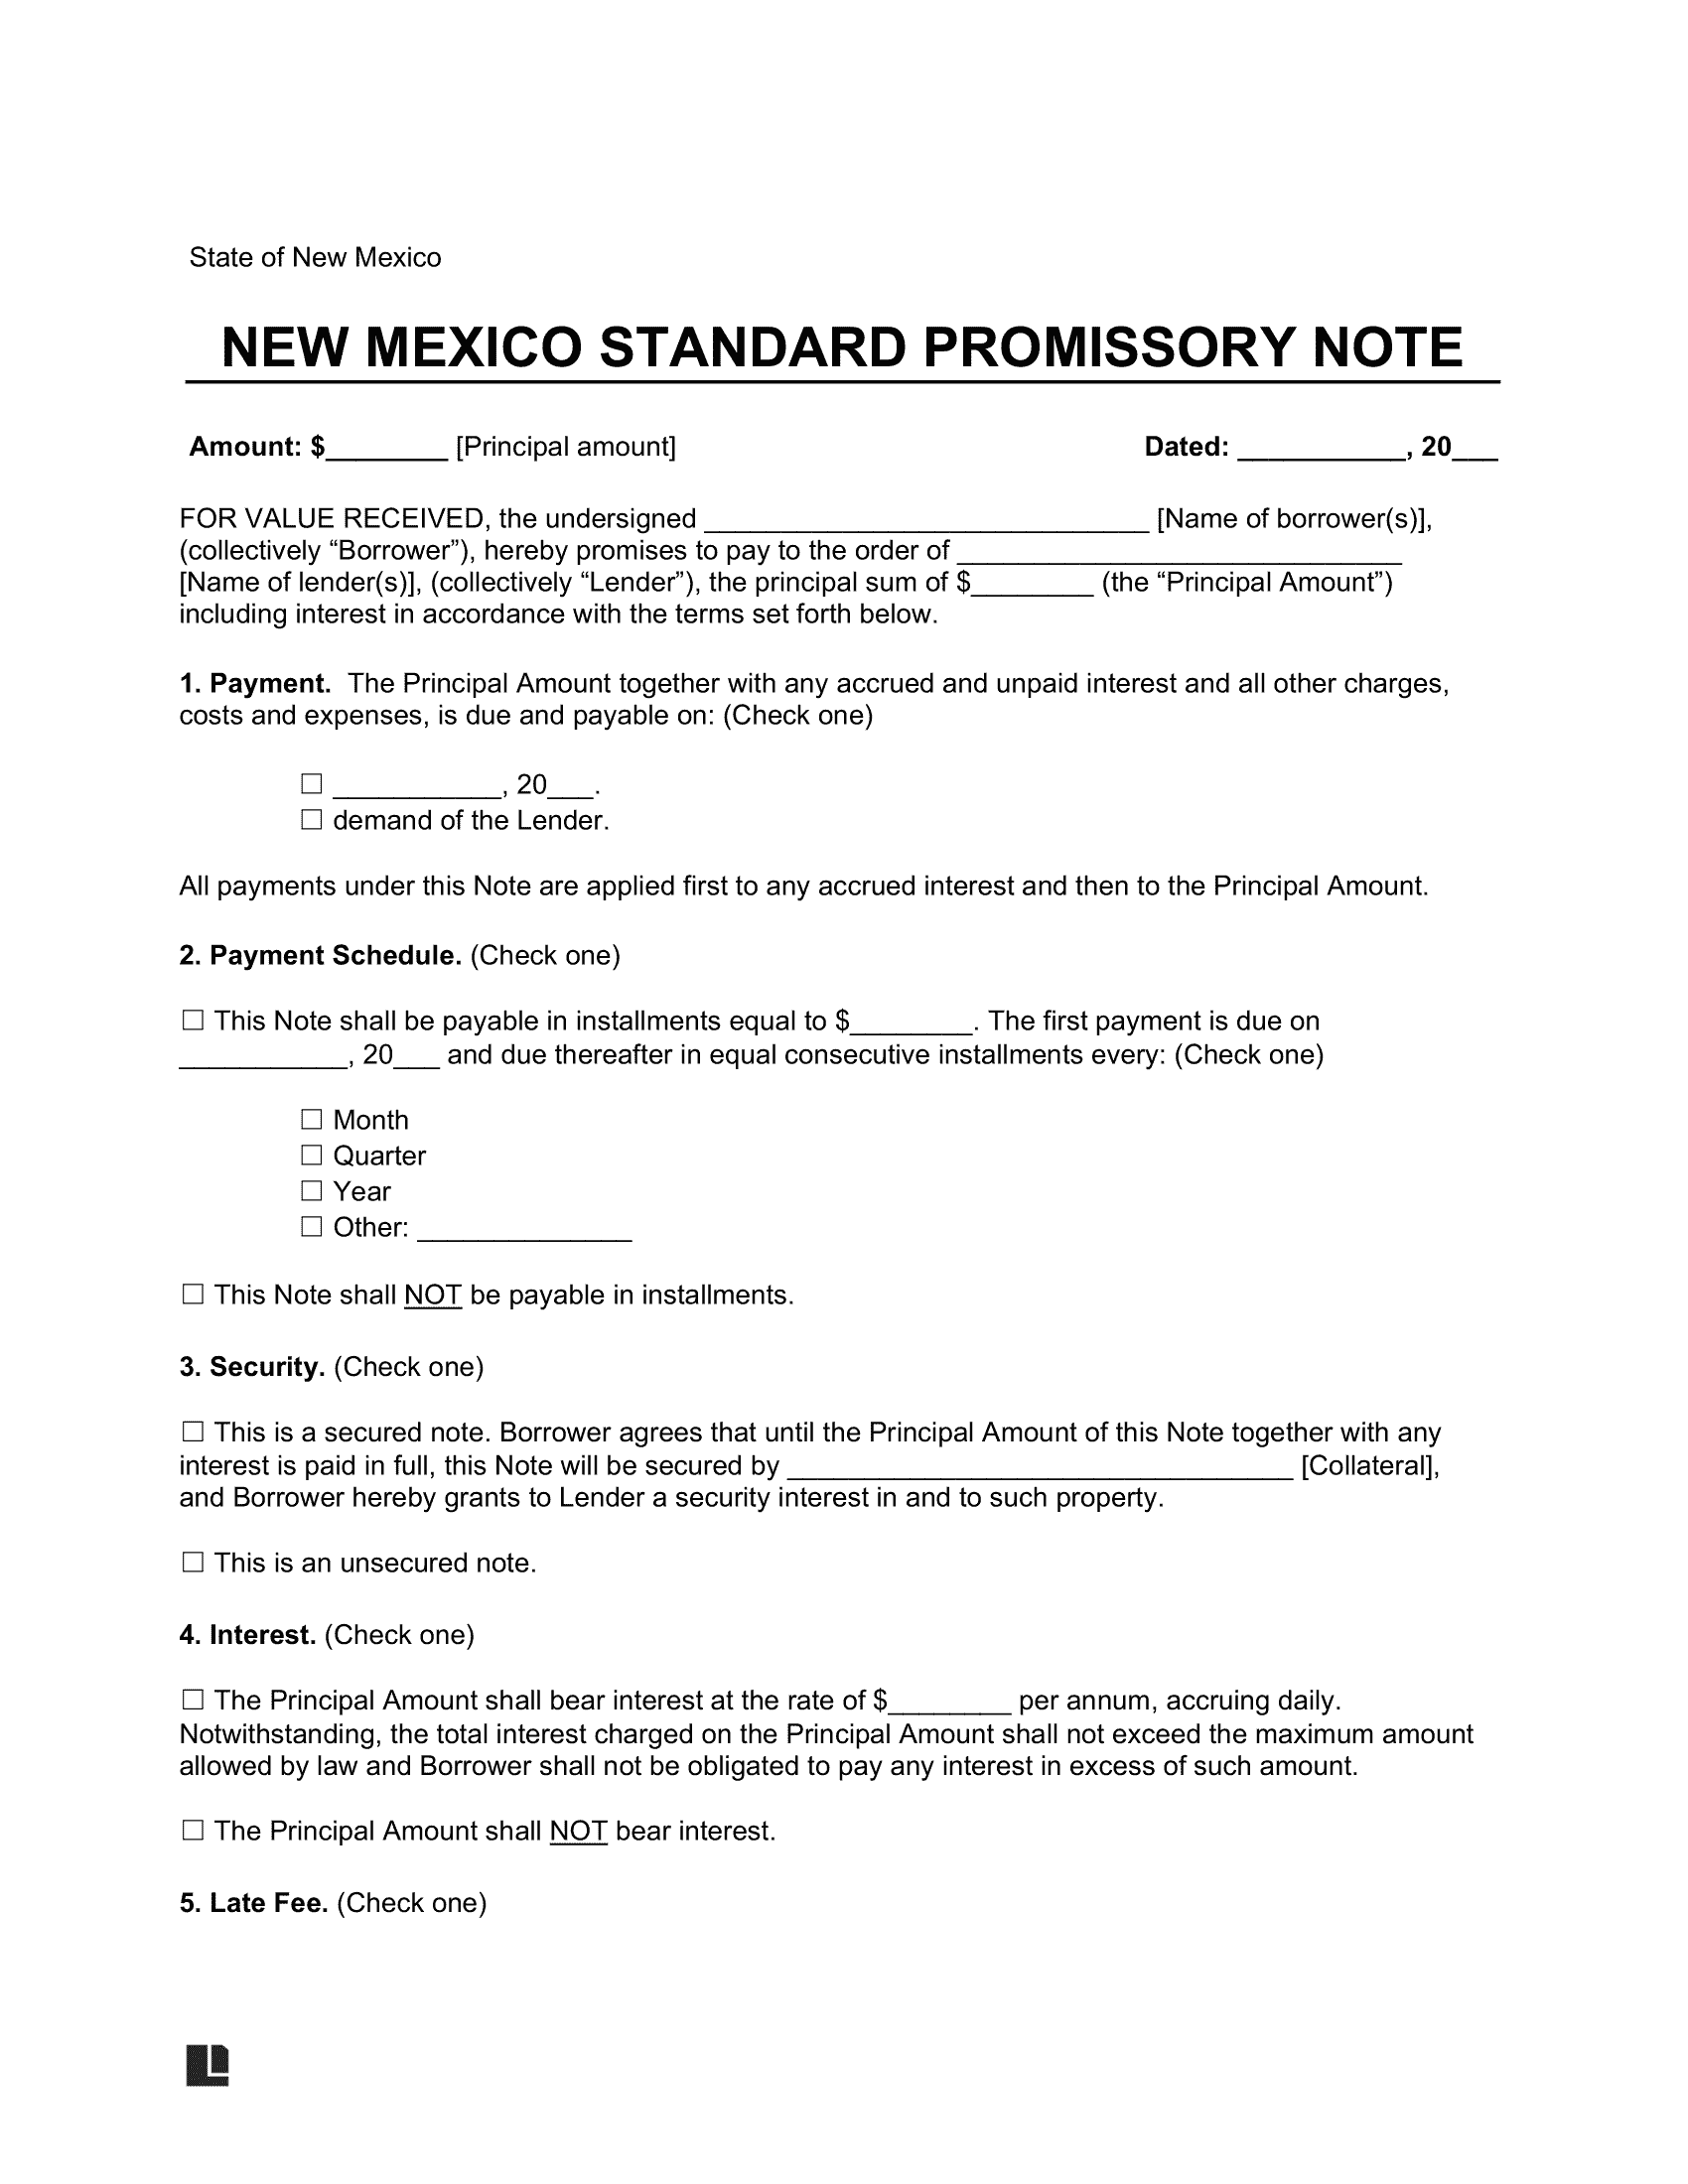 New Mexico Standard Promissory Note Template